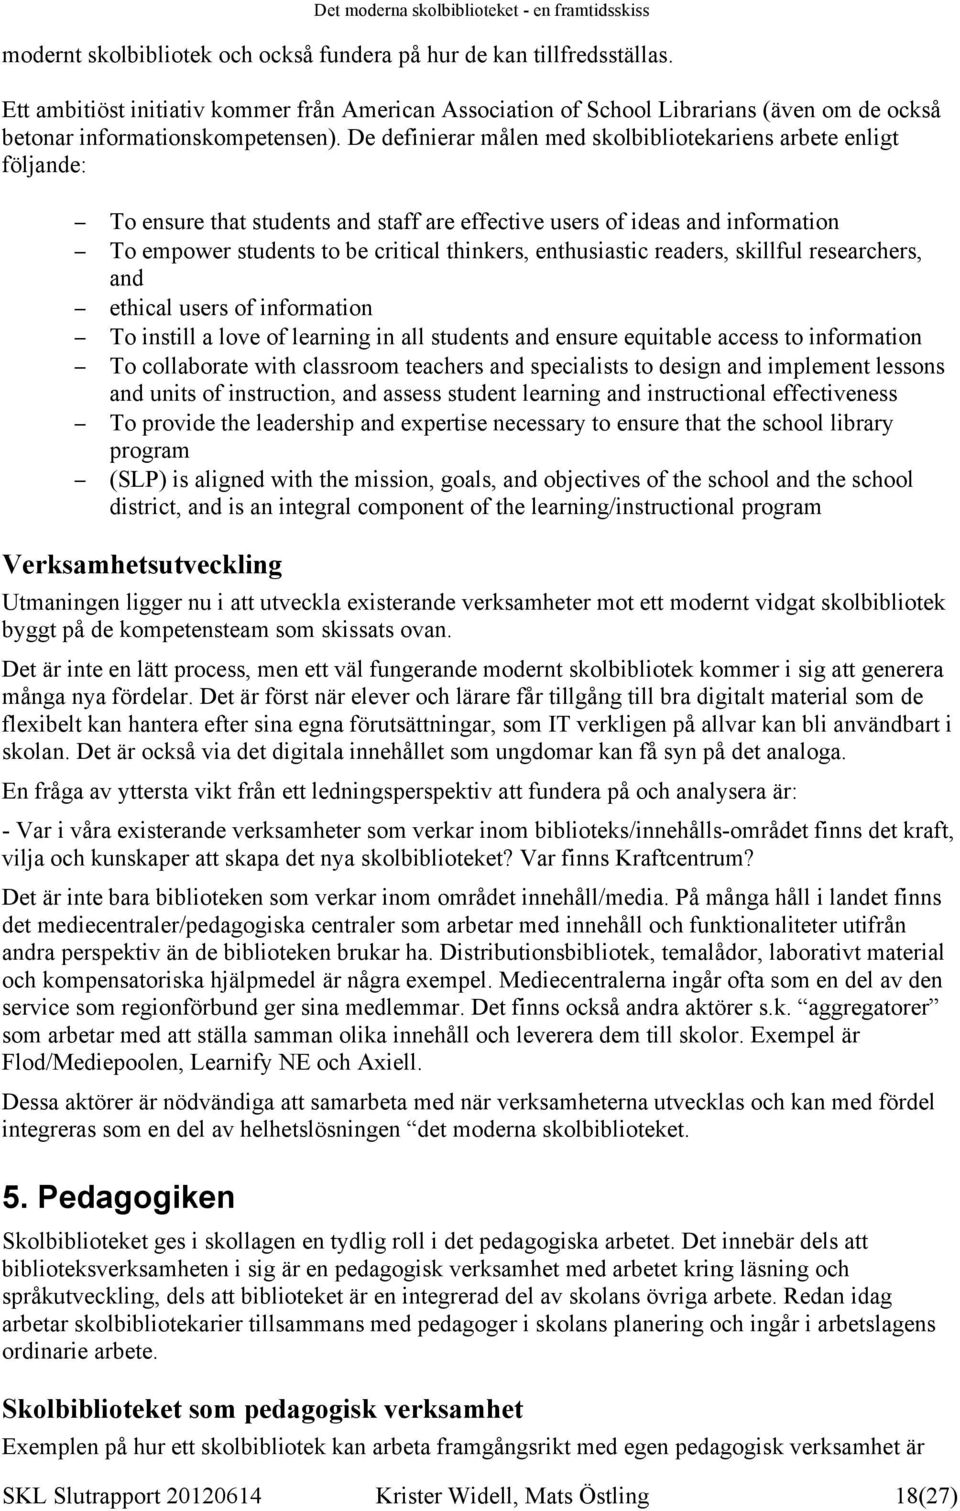 De definierar målen med skolbibliotekariens arbete enligt följande: To ensure that students and staff are effective users of ideas and information To empower students to be critical thinkers,